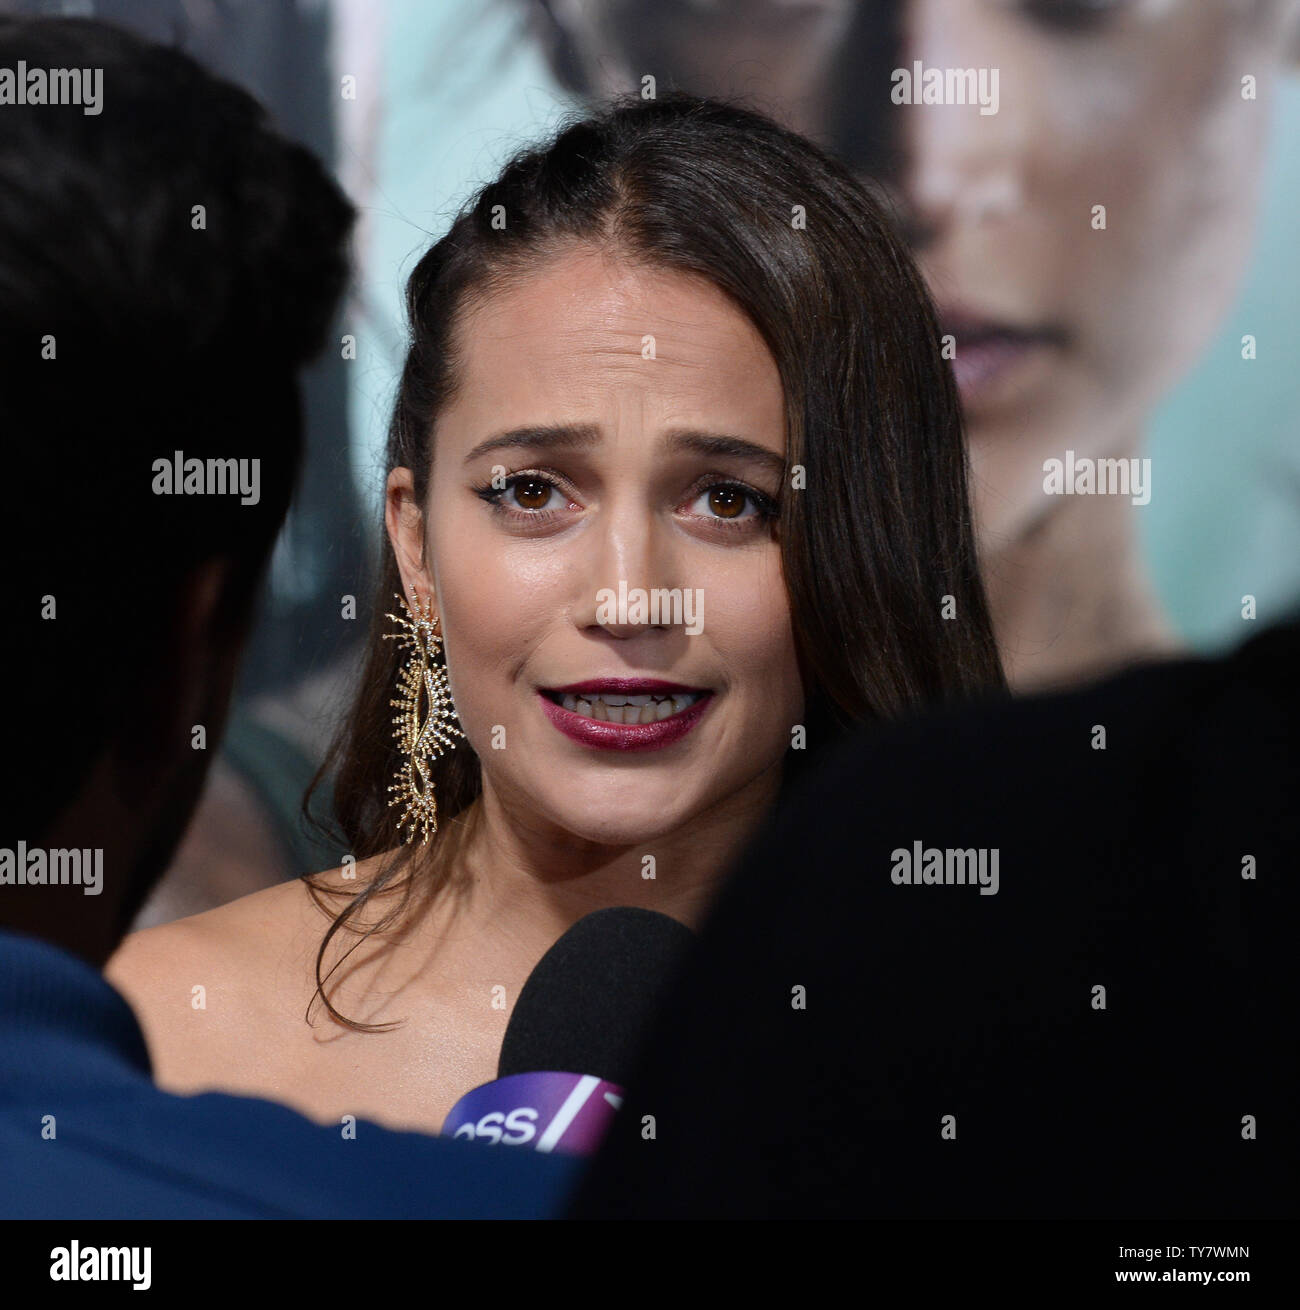 Cast member Alicia Vikander attends the premiere of the motion